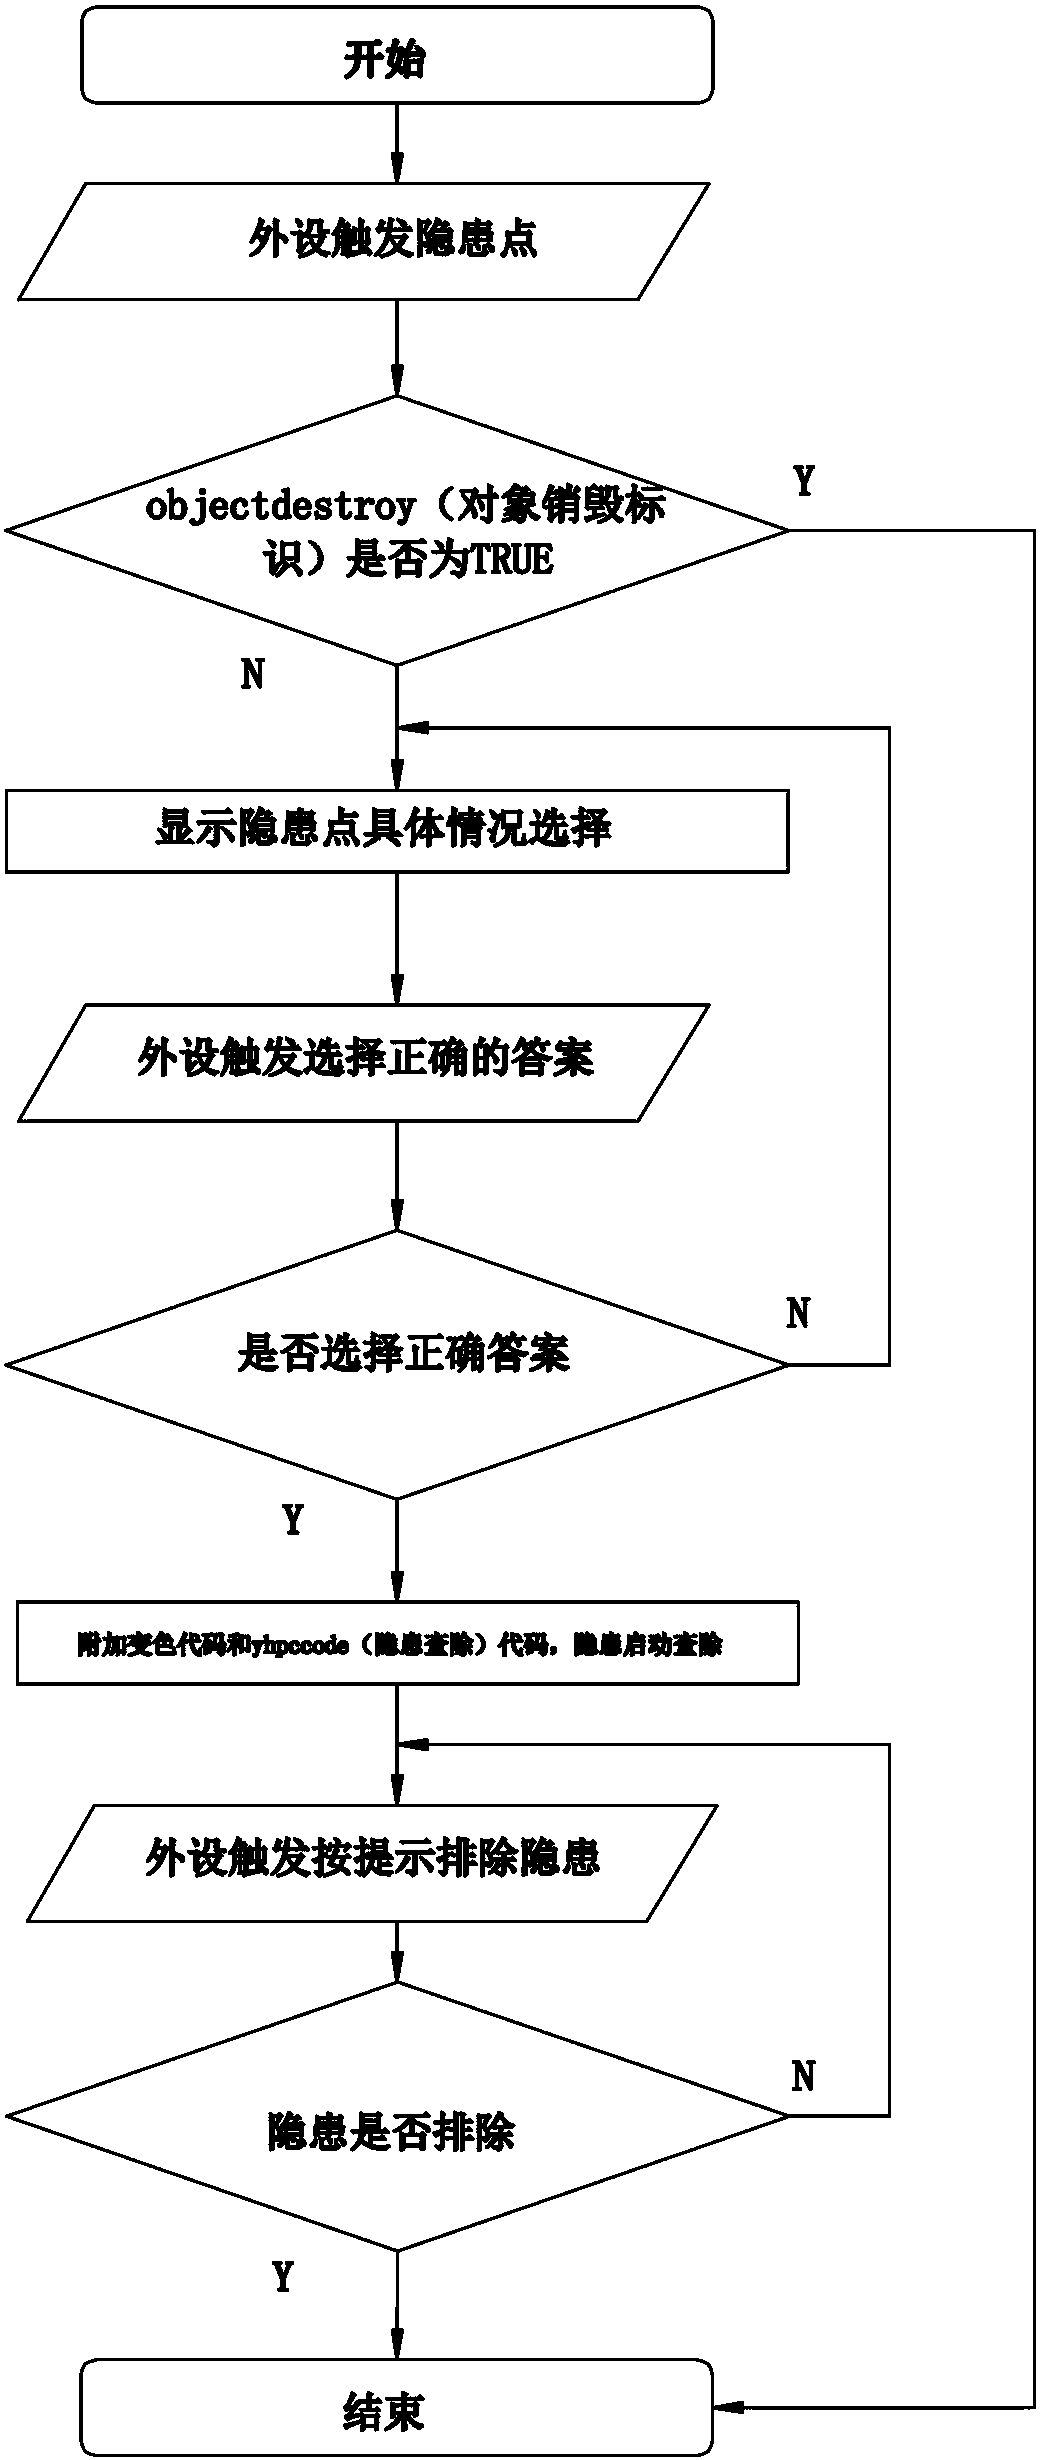 VR-based potential safety hazard checking and eliminating exercise method and system